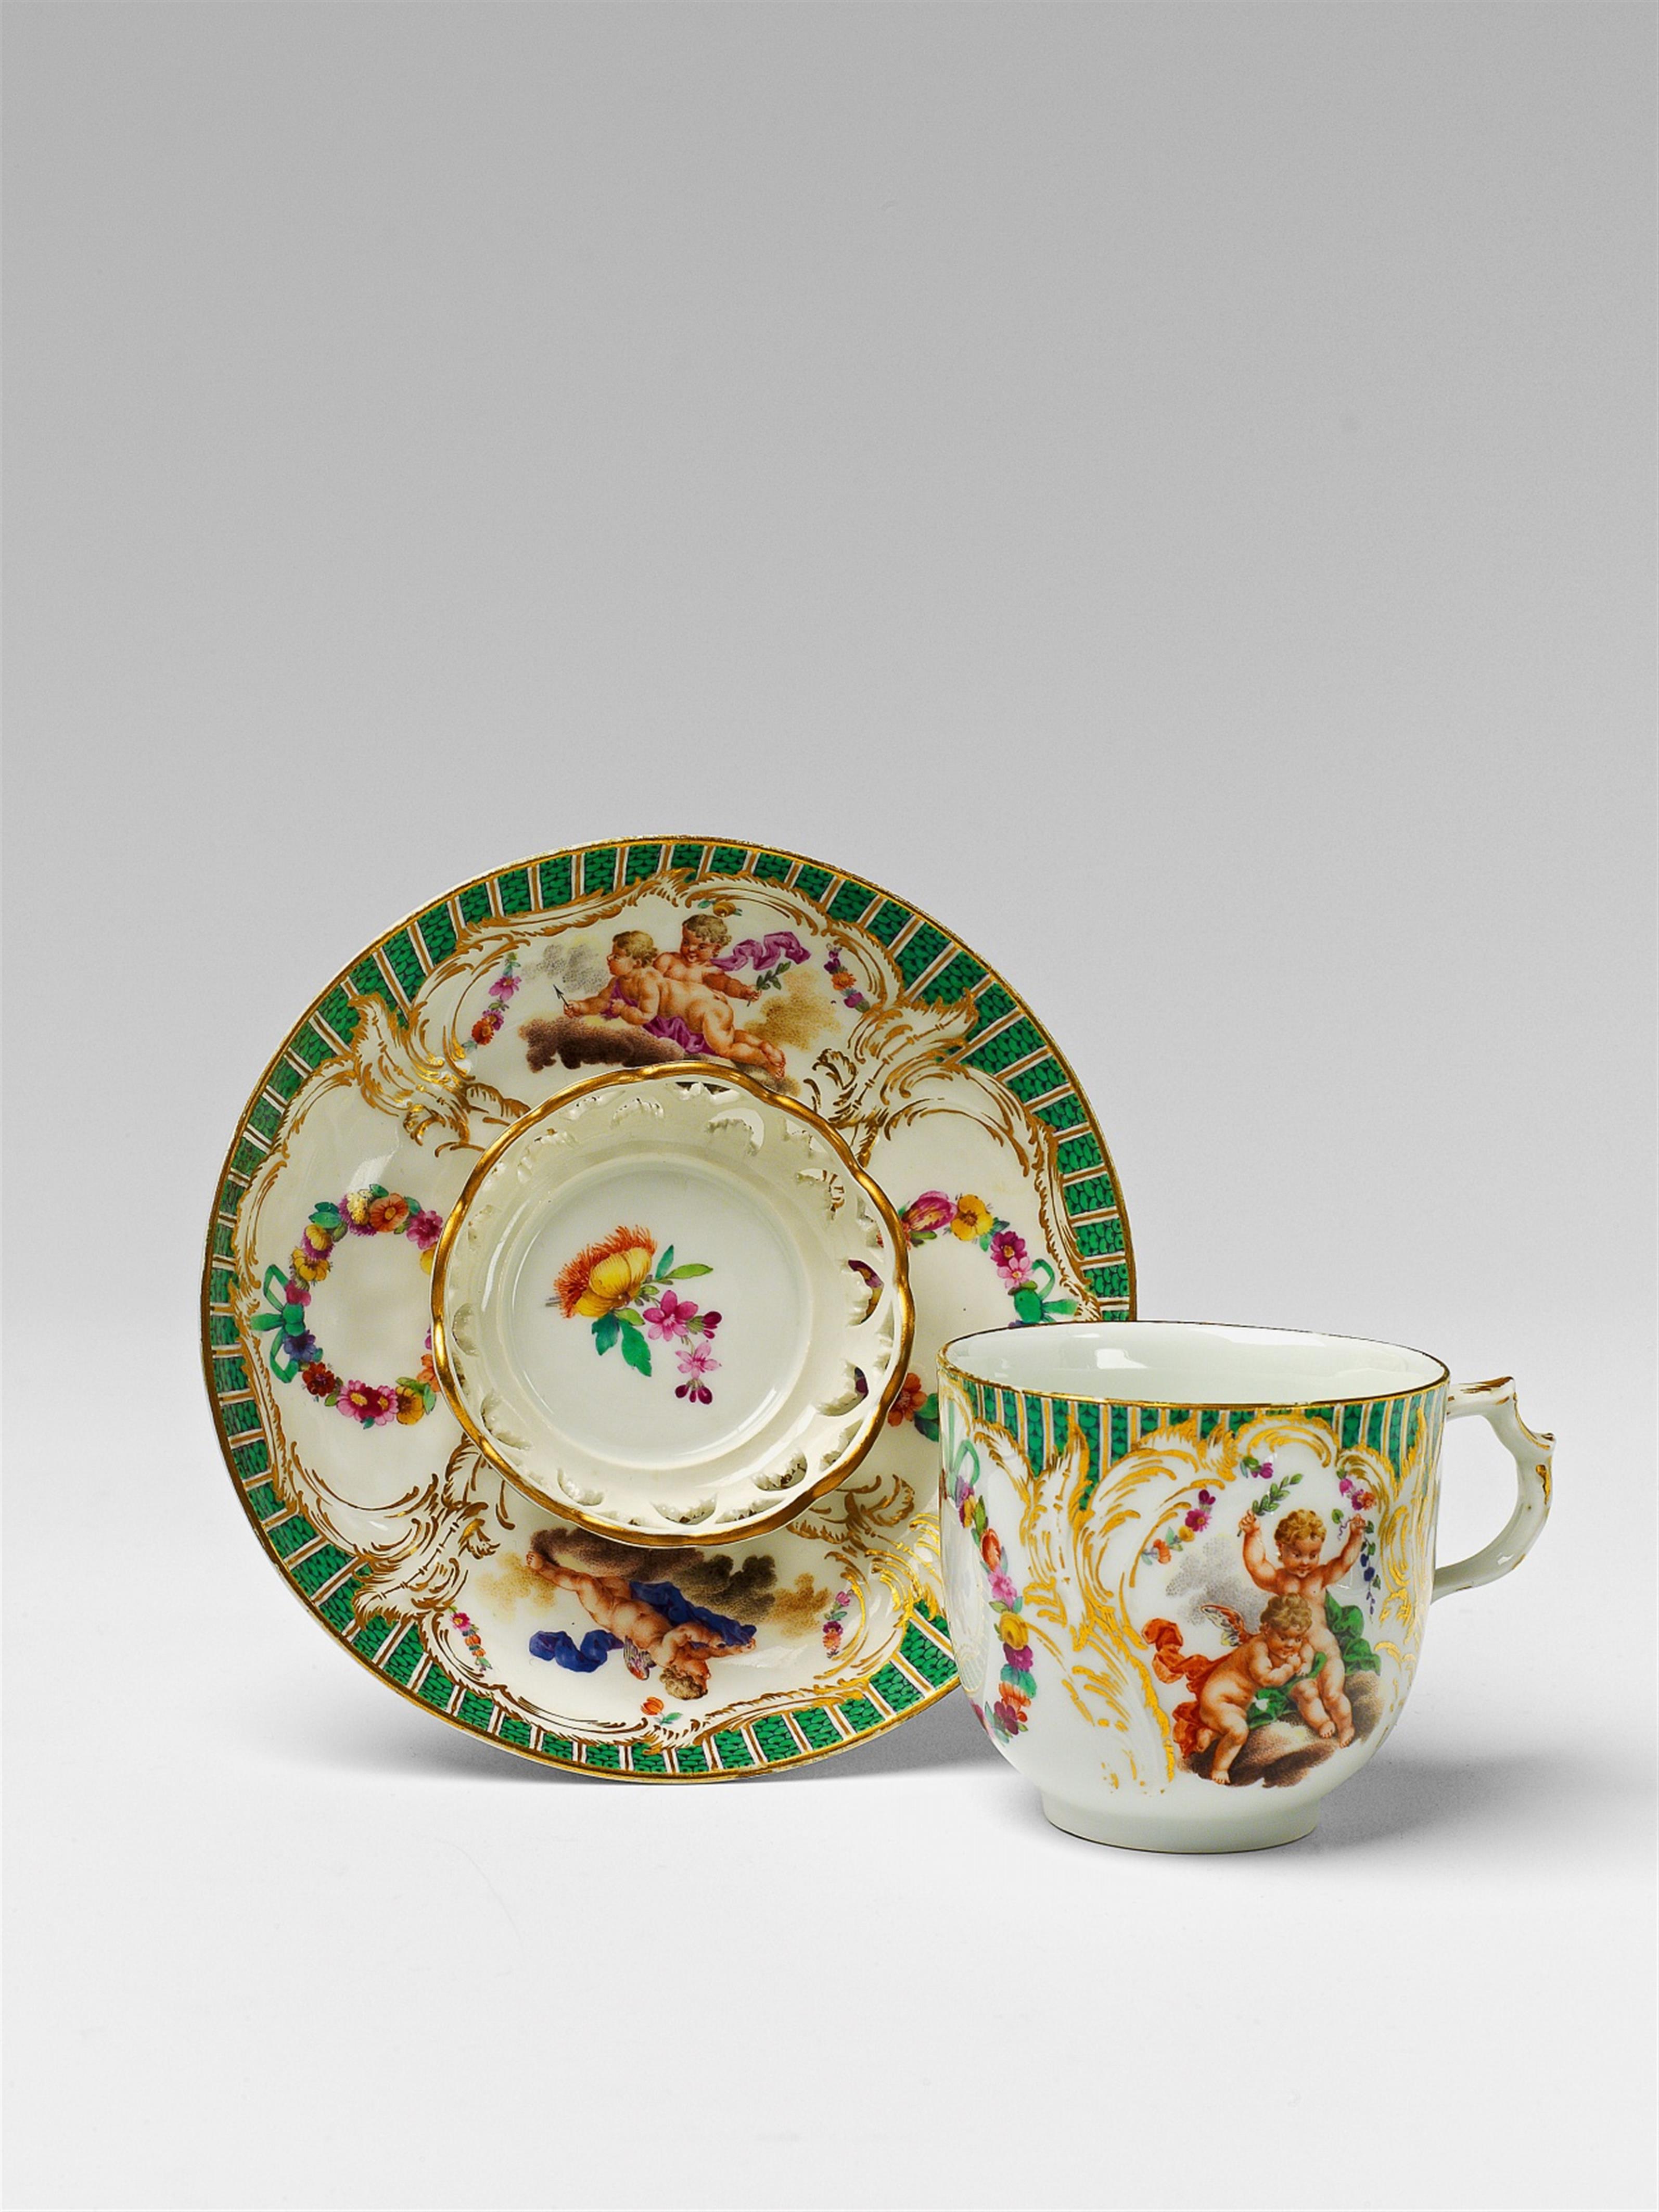 An early Berlin KPM porcelain trembleuse with putti - image-1